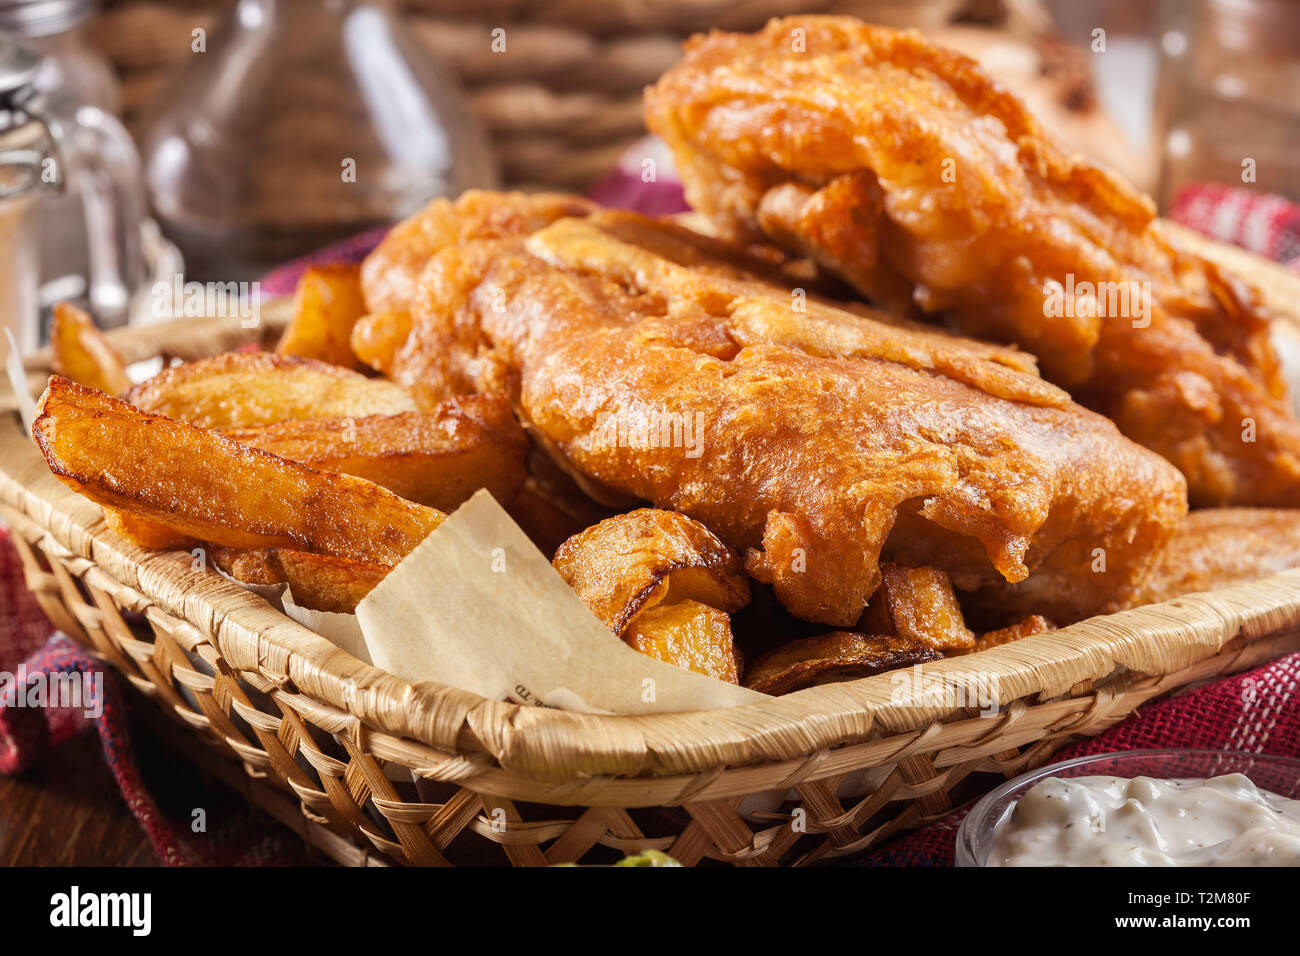 Traditional fish in beer batter and chips served on basket Stock Photo -  Alamy